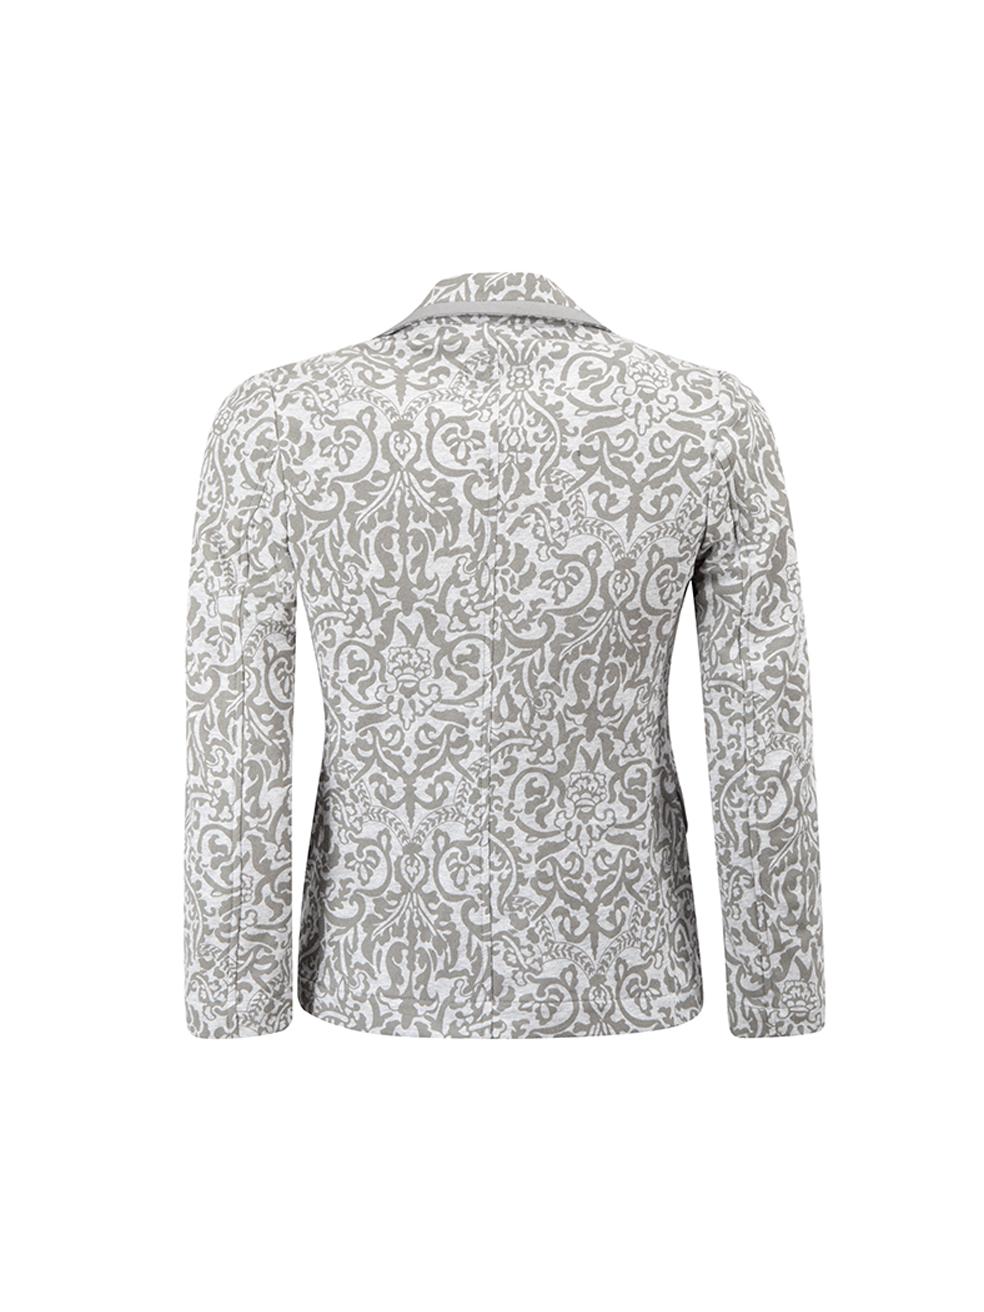 Roberto Cavalli Women's Grey Patterned Blazer Style Jacket In Good Condition For Sale In London, GB